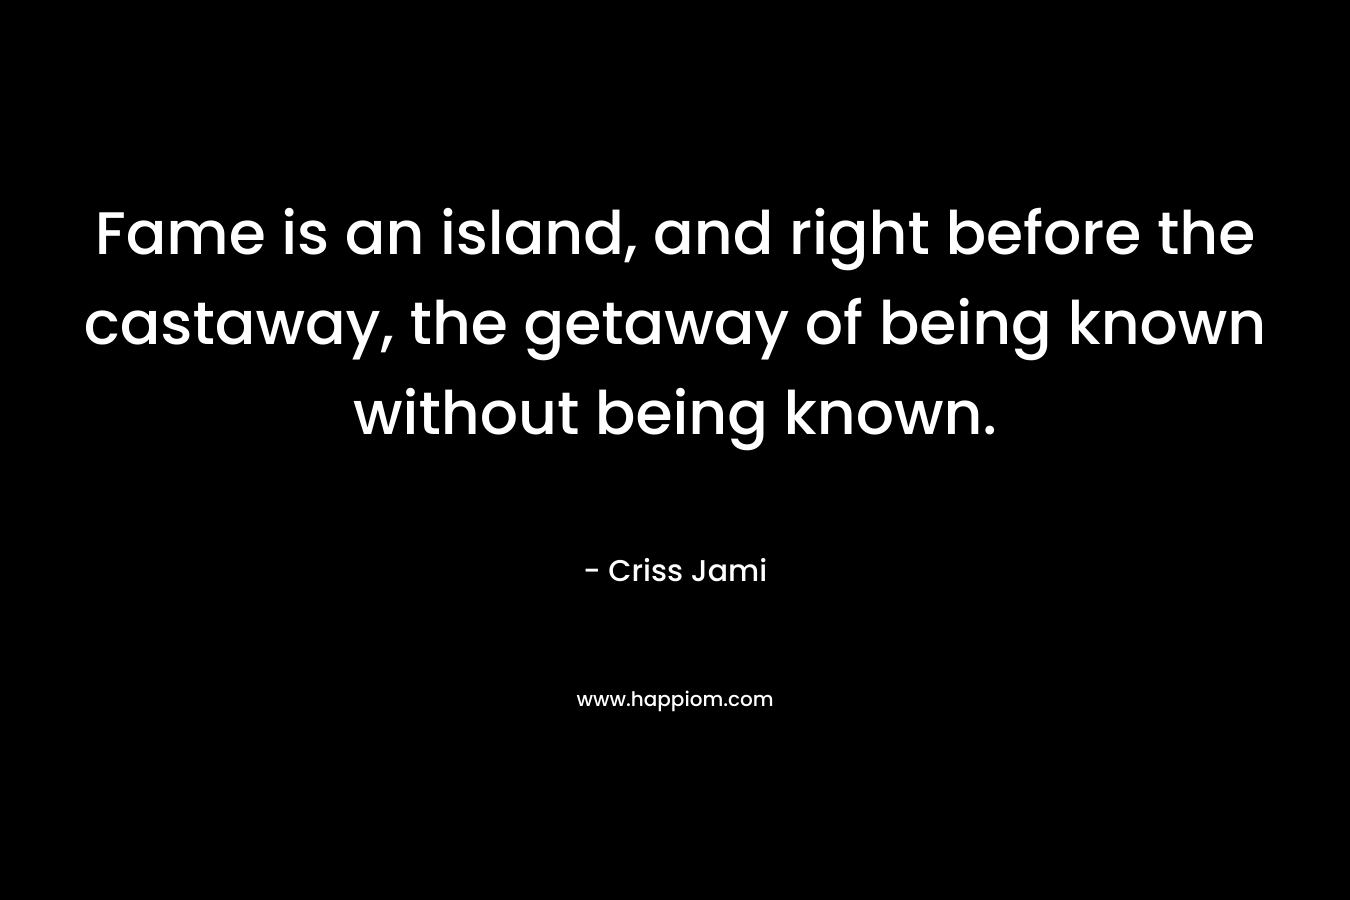 Fame is an island, and right before the castaway, the getaway of being known without being known. – Criss Jami